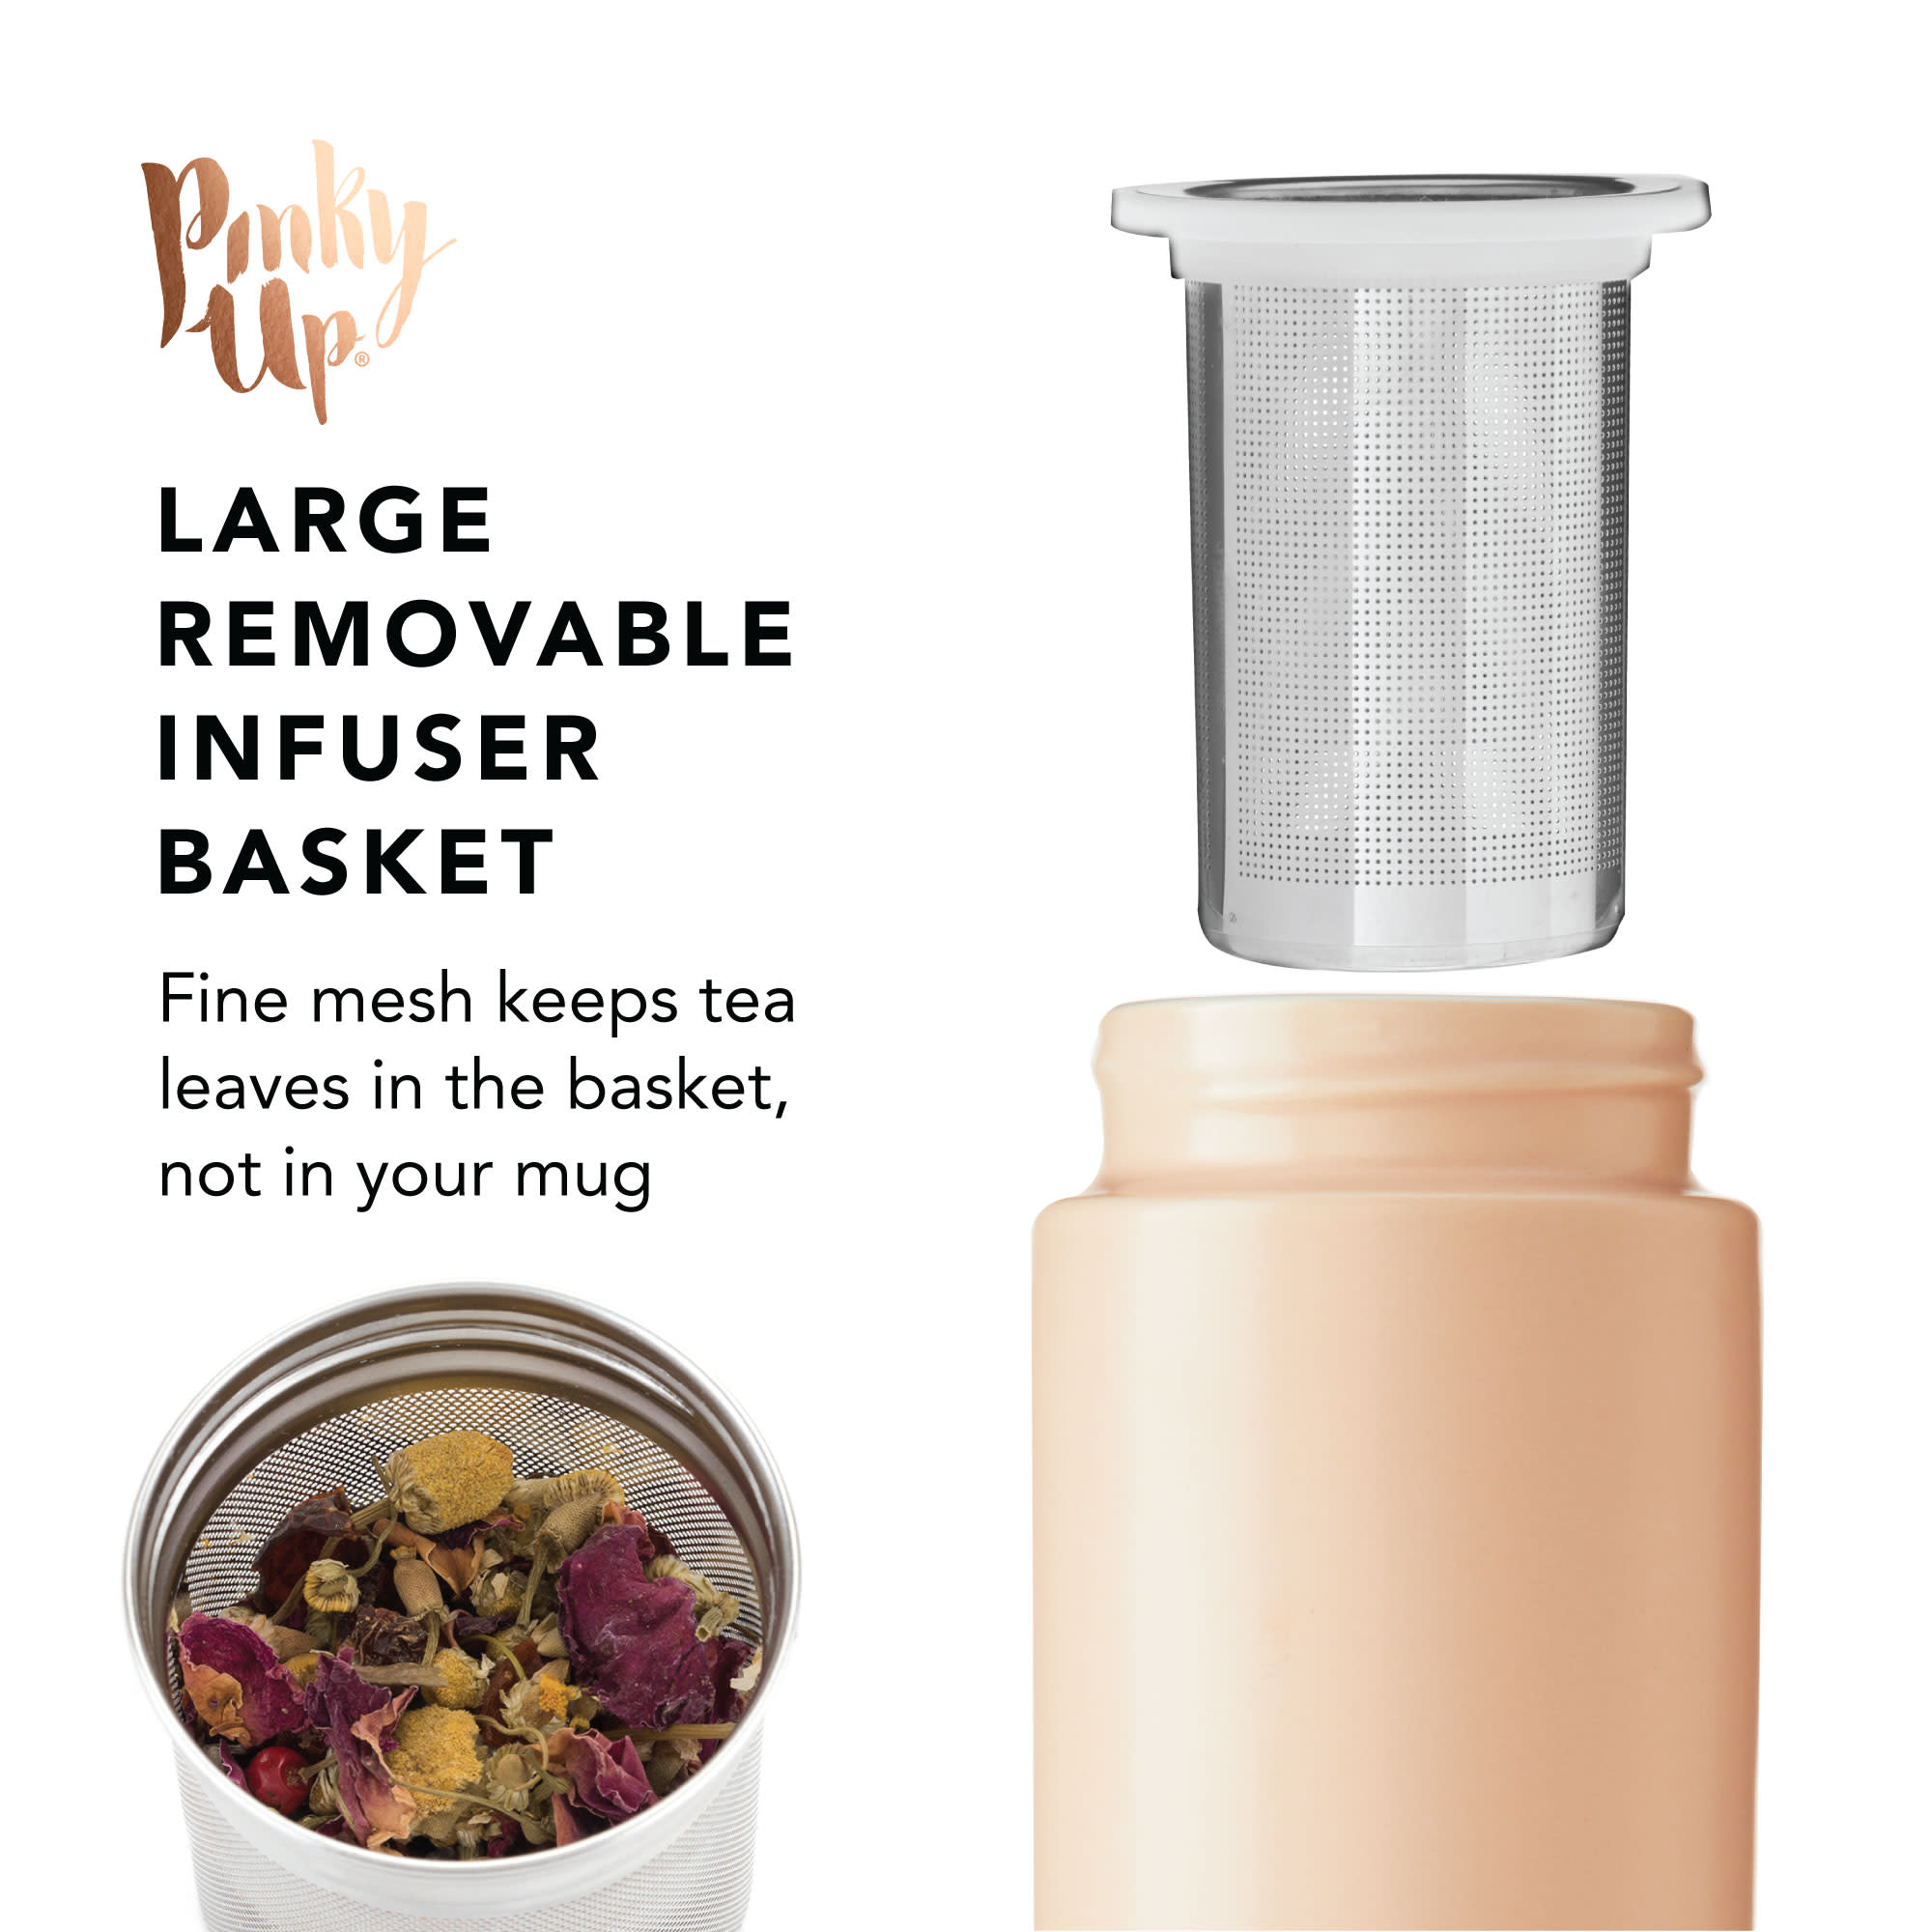 Tatyana Ceramic To-Go Infuser Mug in Coral by Pinky Up (10923)